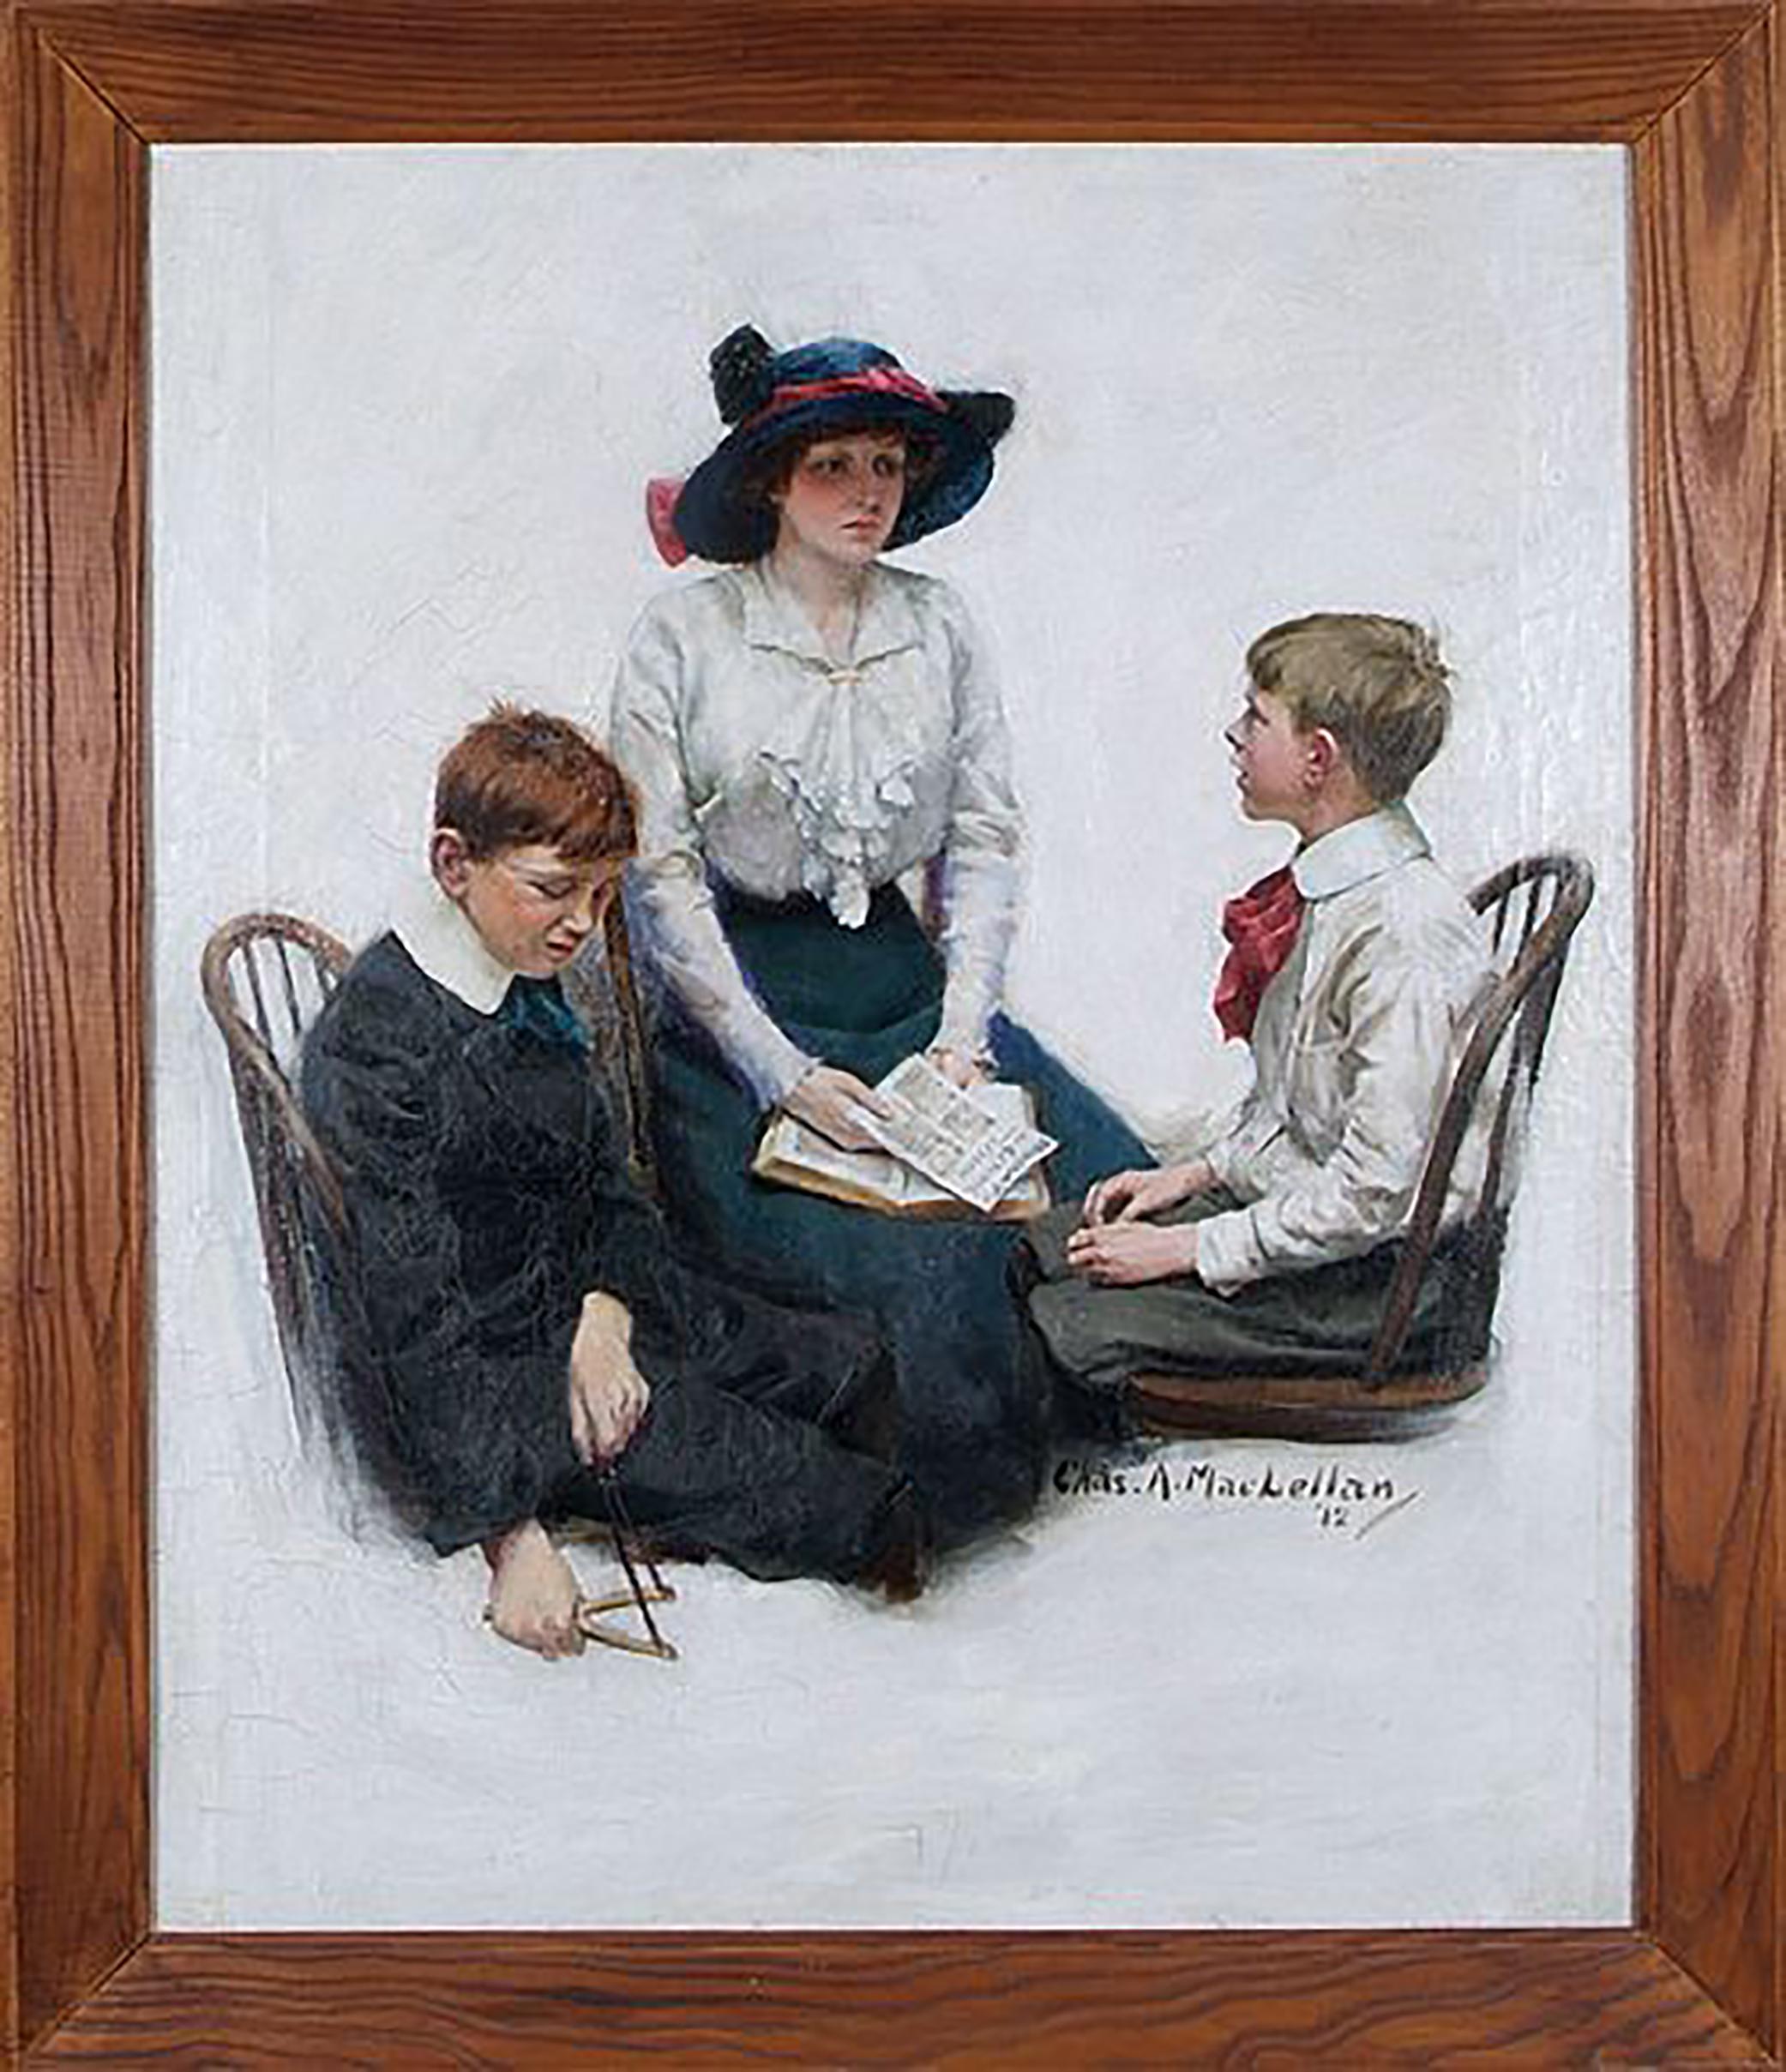 Saturday Evening Post Cover, September 13, 1913 - Painting by Charles MacLellan